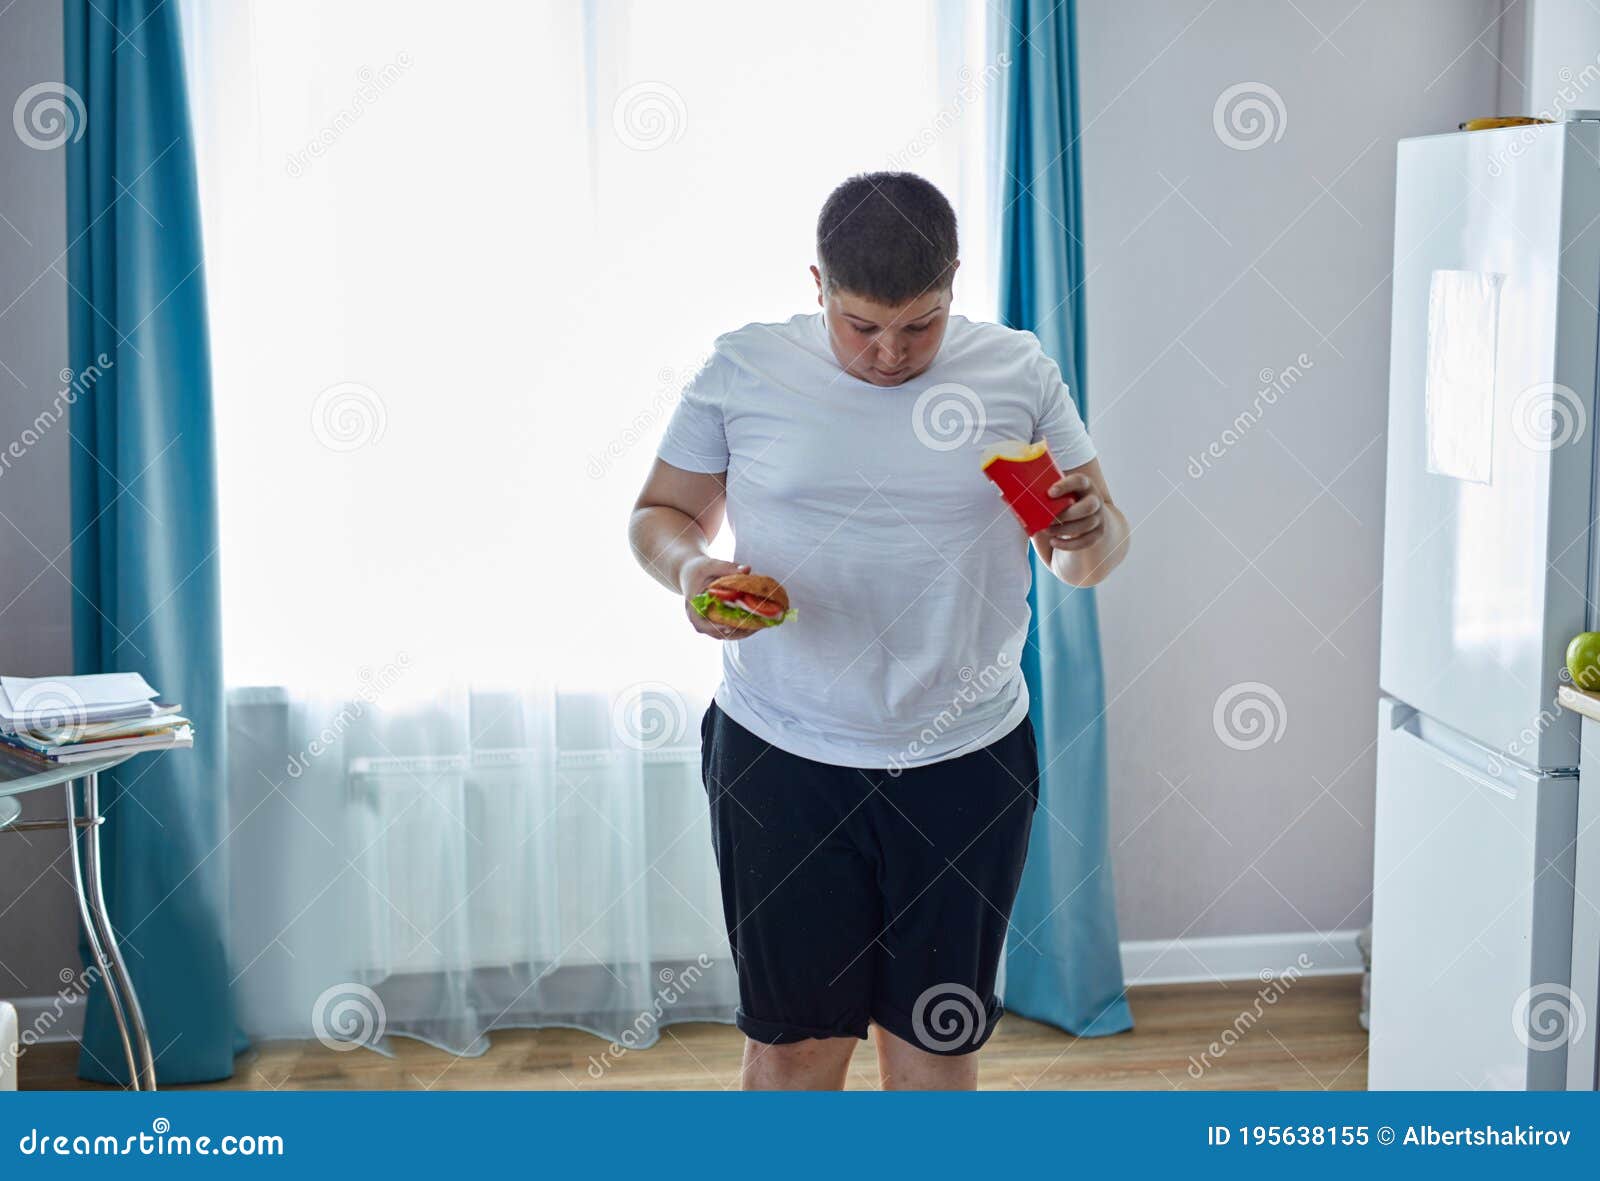 Fat Teen Boy Check His Weight On Scales Stock Image Image Of Measure